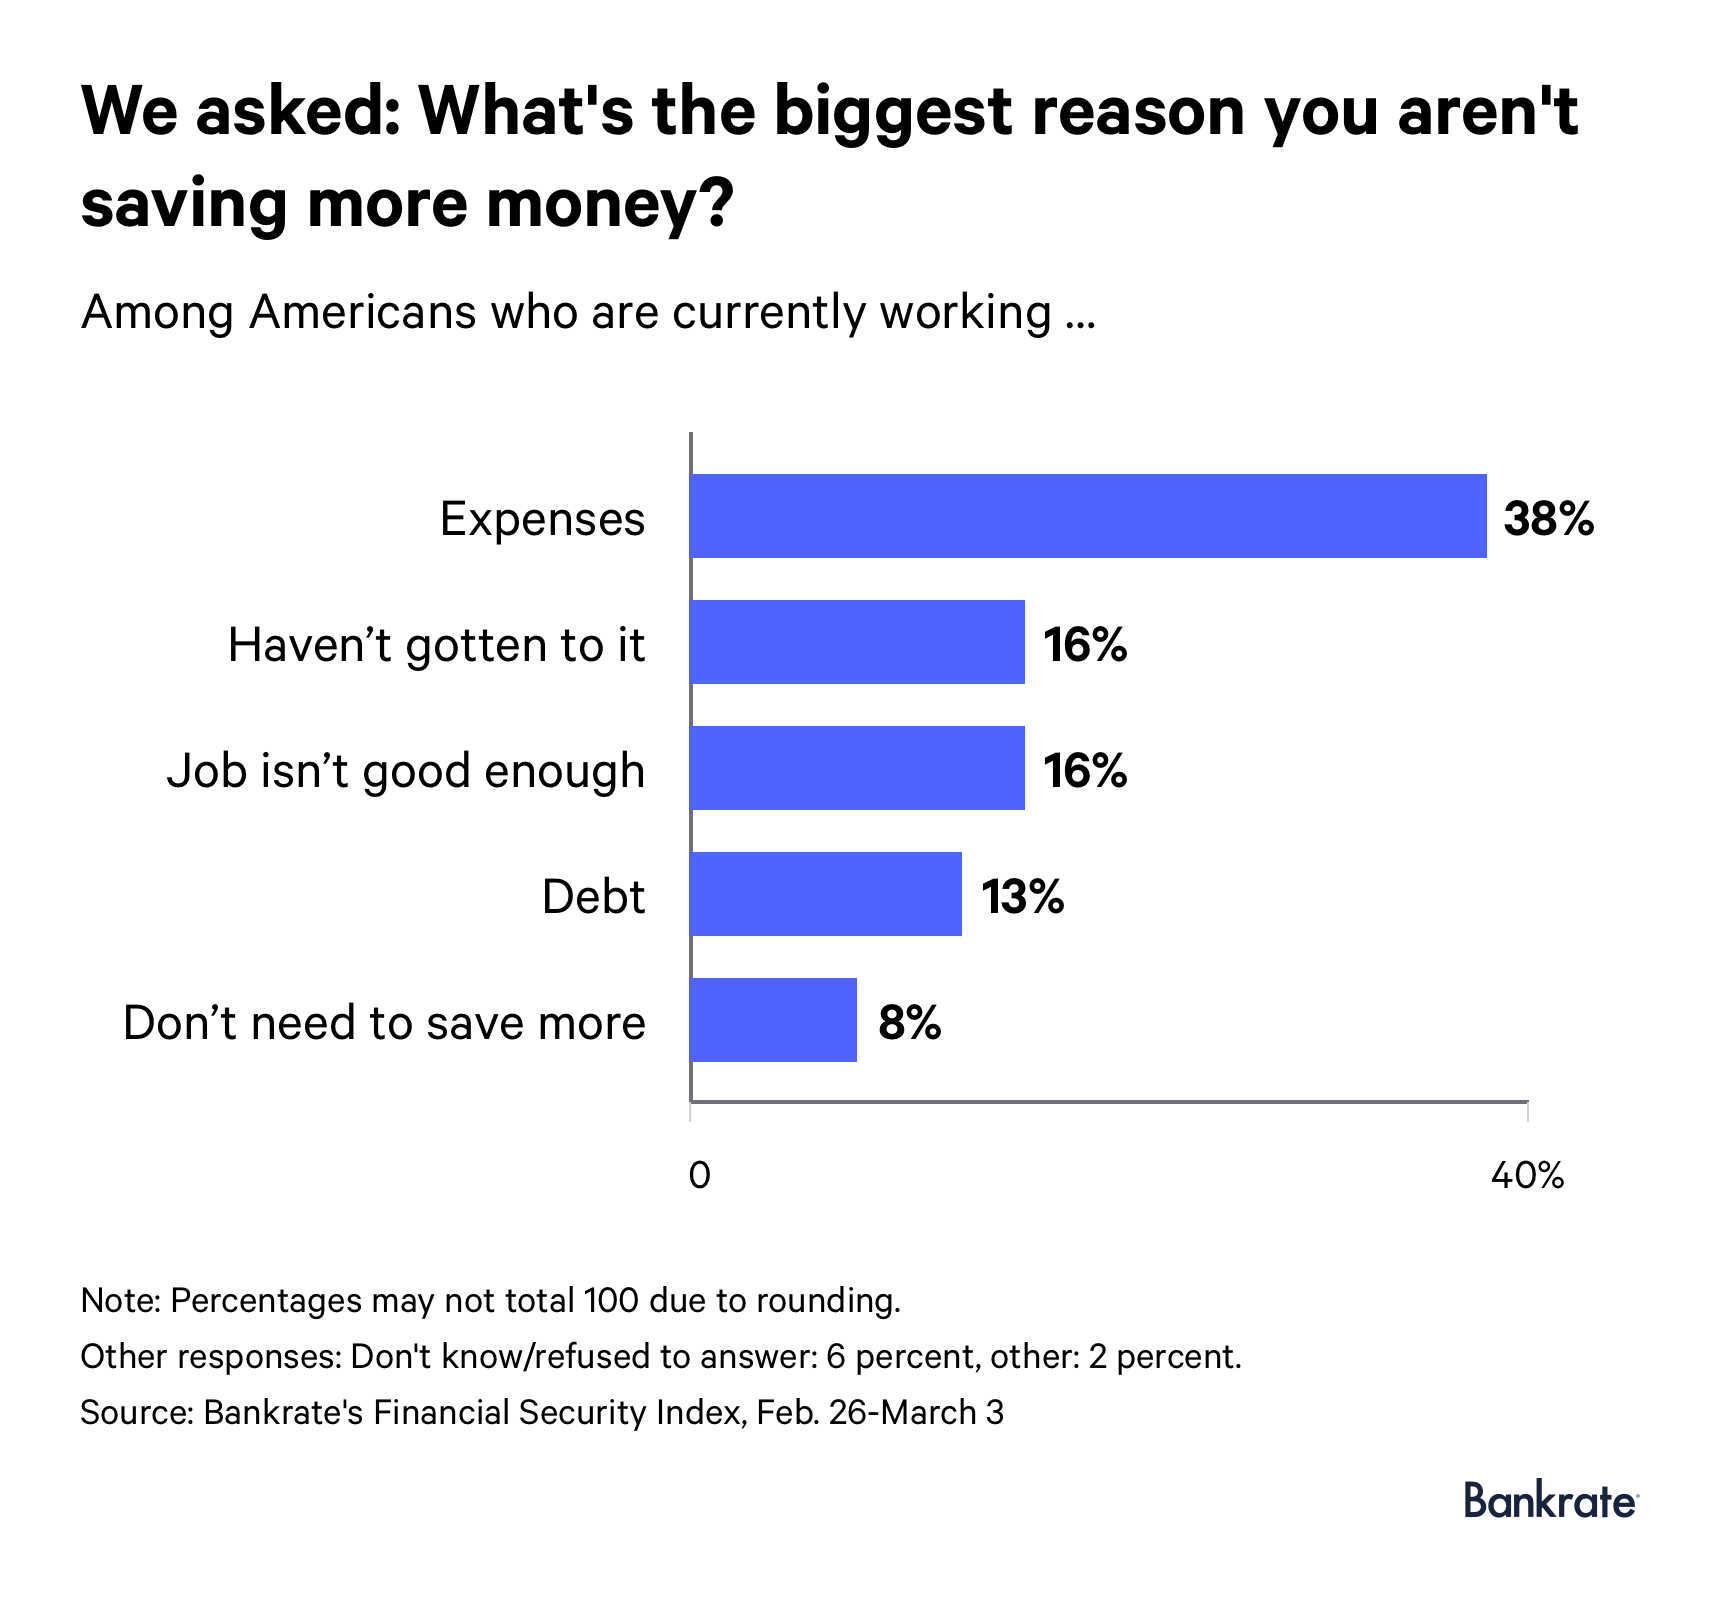 Graph: 38% of working Americans say expenses is the biggest reason they aren't saving more money